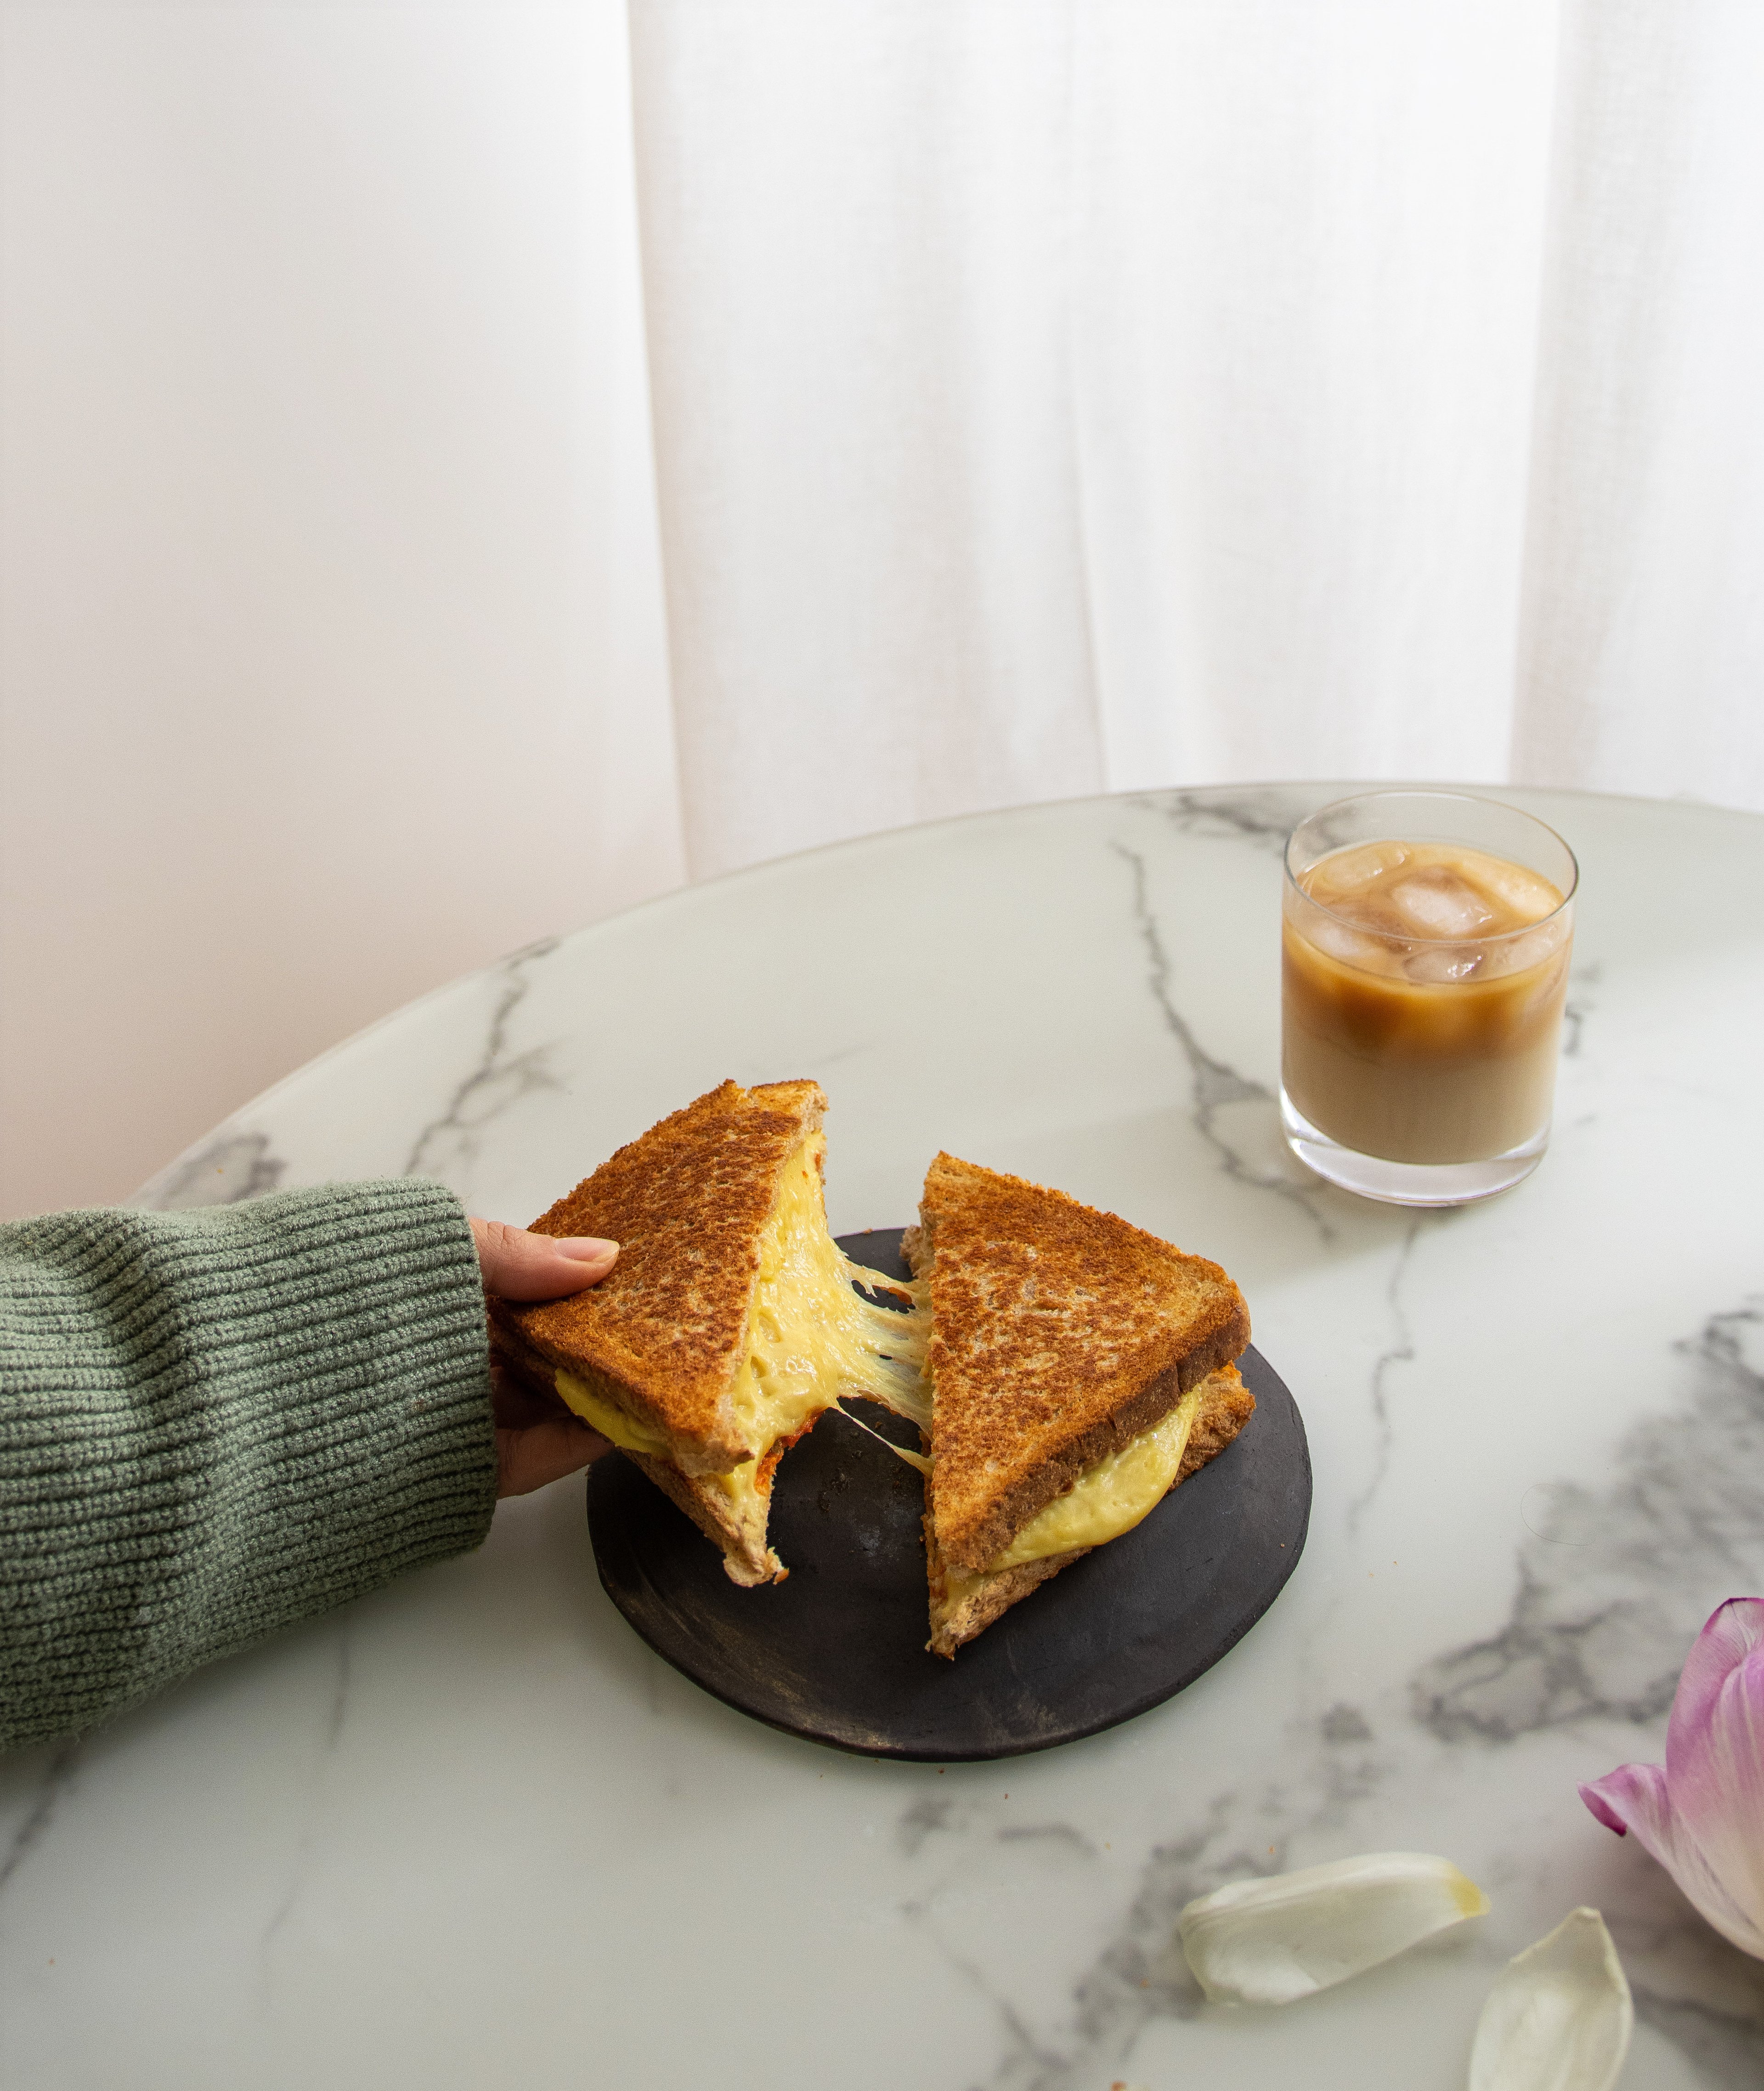 Ultimate vegan grilled cheese